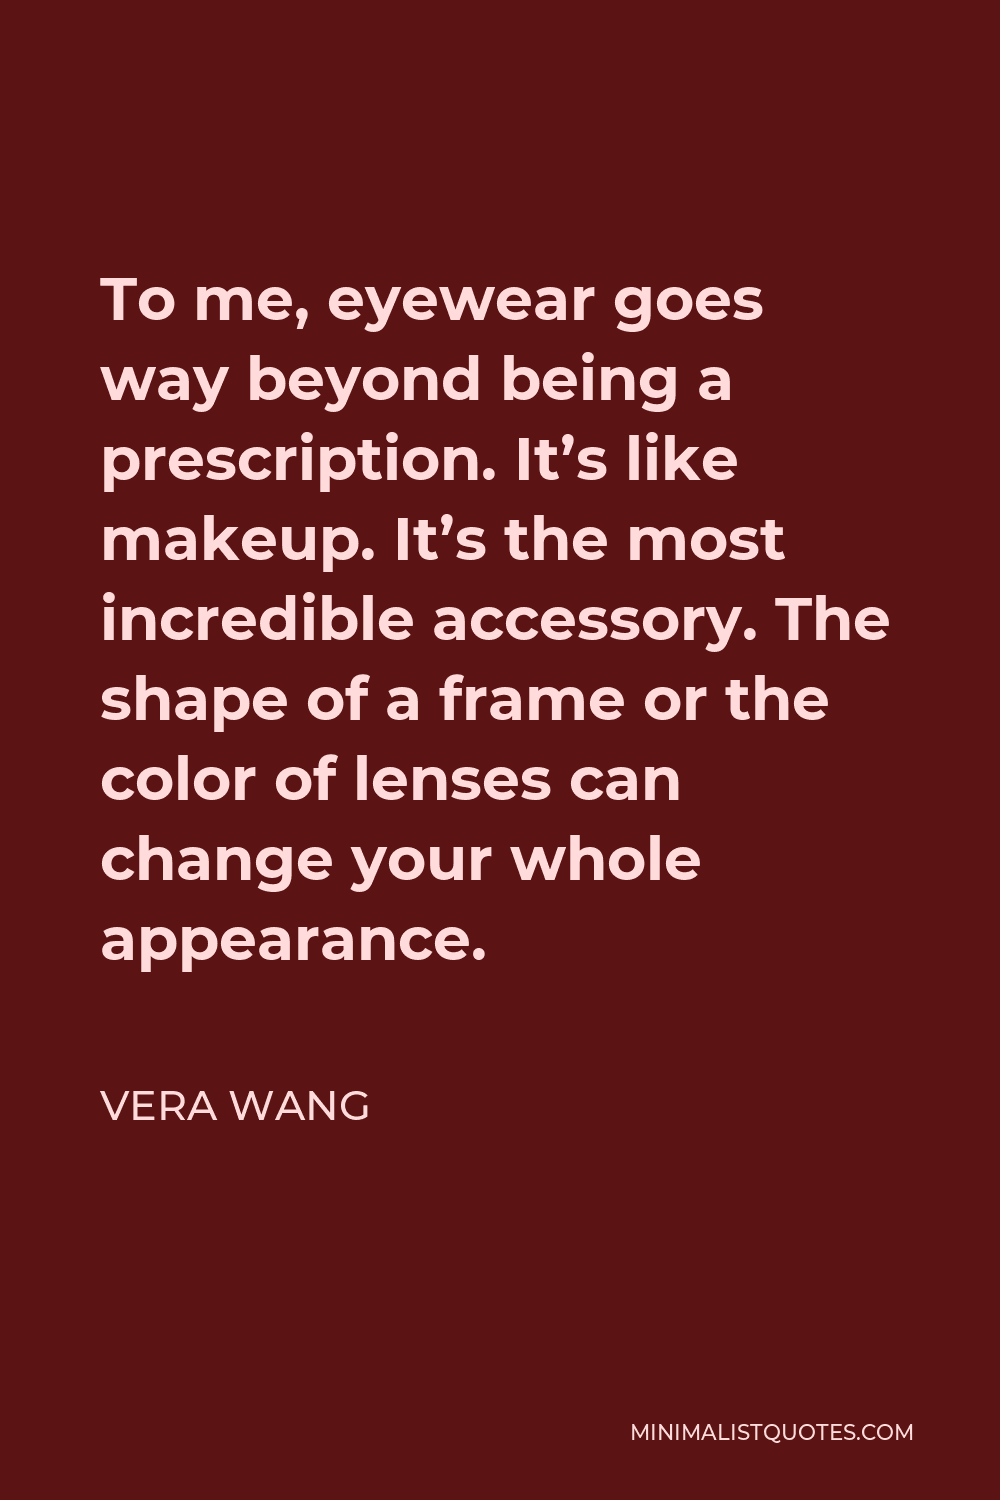 Vera Wang Quote - To me, eyewear goes way beyond being a prescription. It’s like makeup. It’s the most incredible accessory. The shape of a frame or the color of lenses can change your whole appearance.